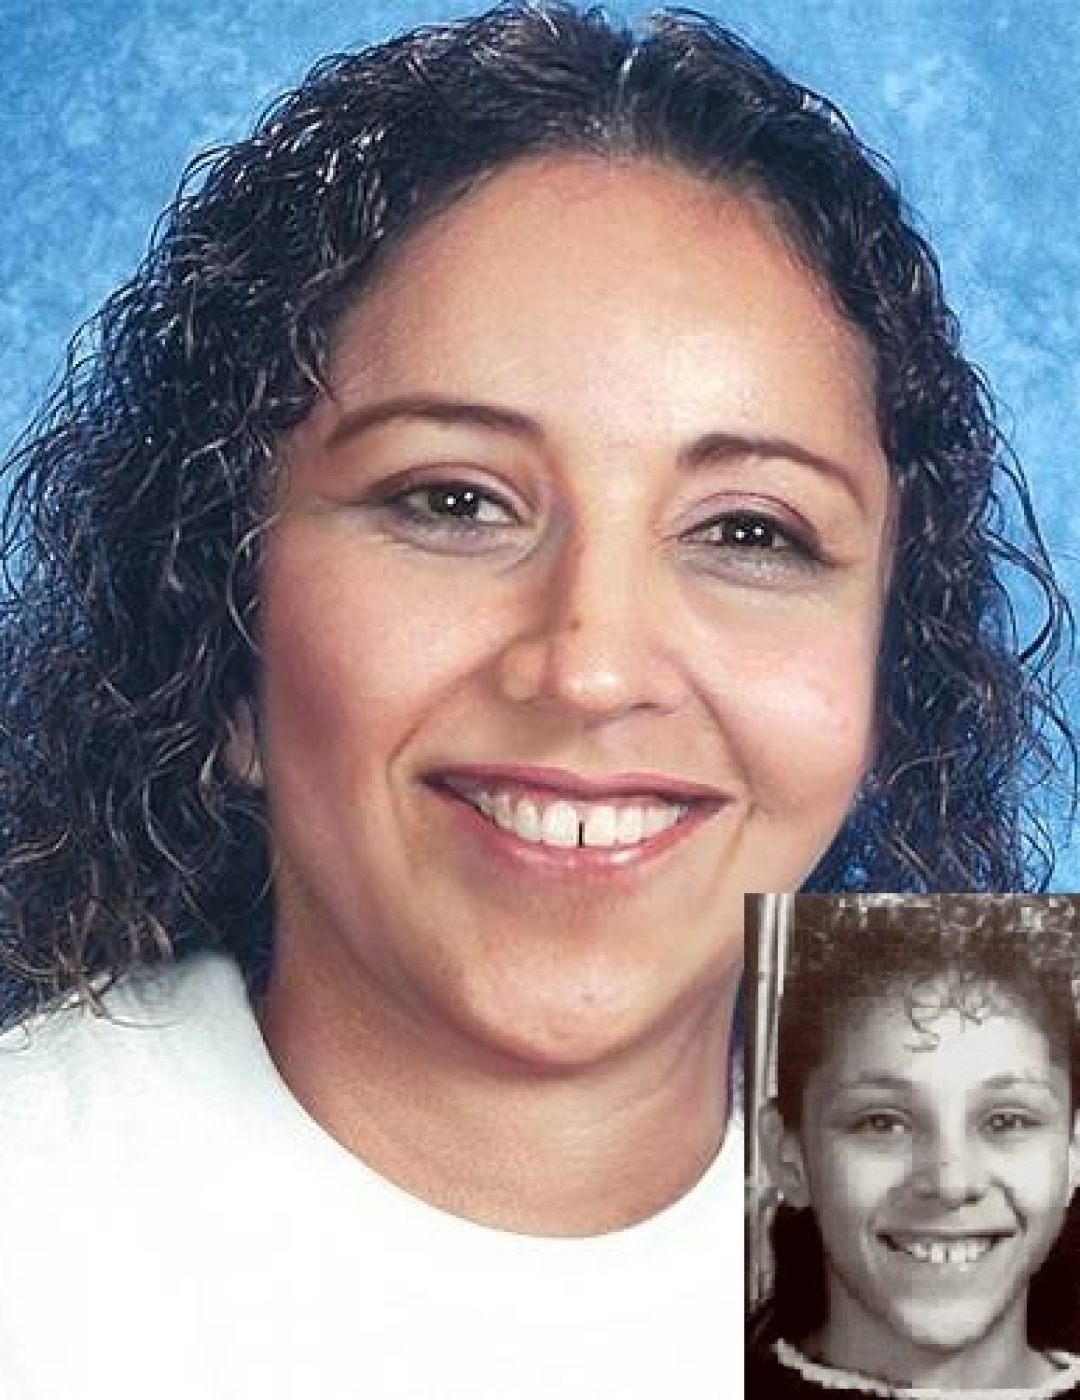 Monique Santiago is a missing Hispanic child with black hair and brown eyes and a gap between her front teeth who disappeared in 1990. The age progressed photo shows Monique at 38 years of age.